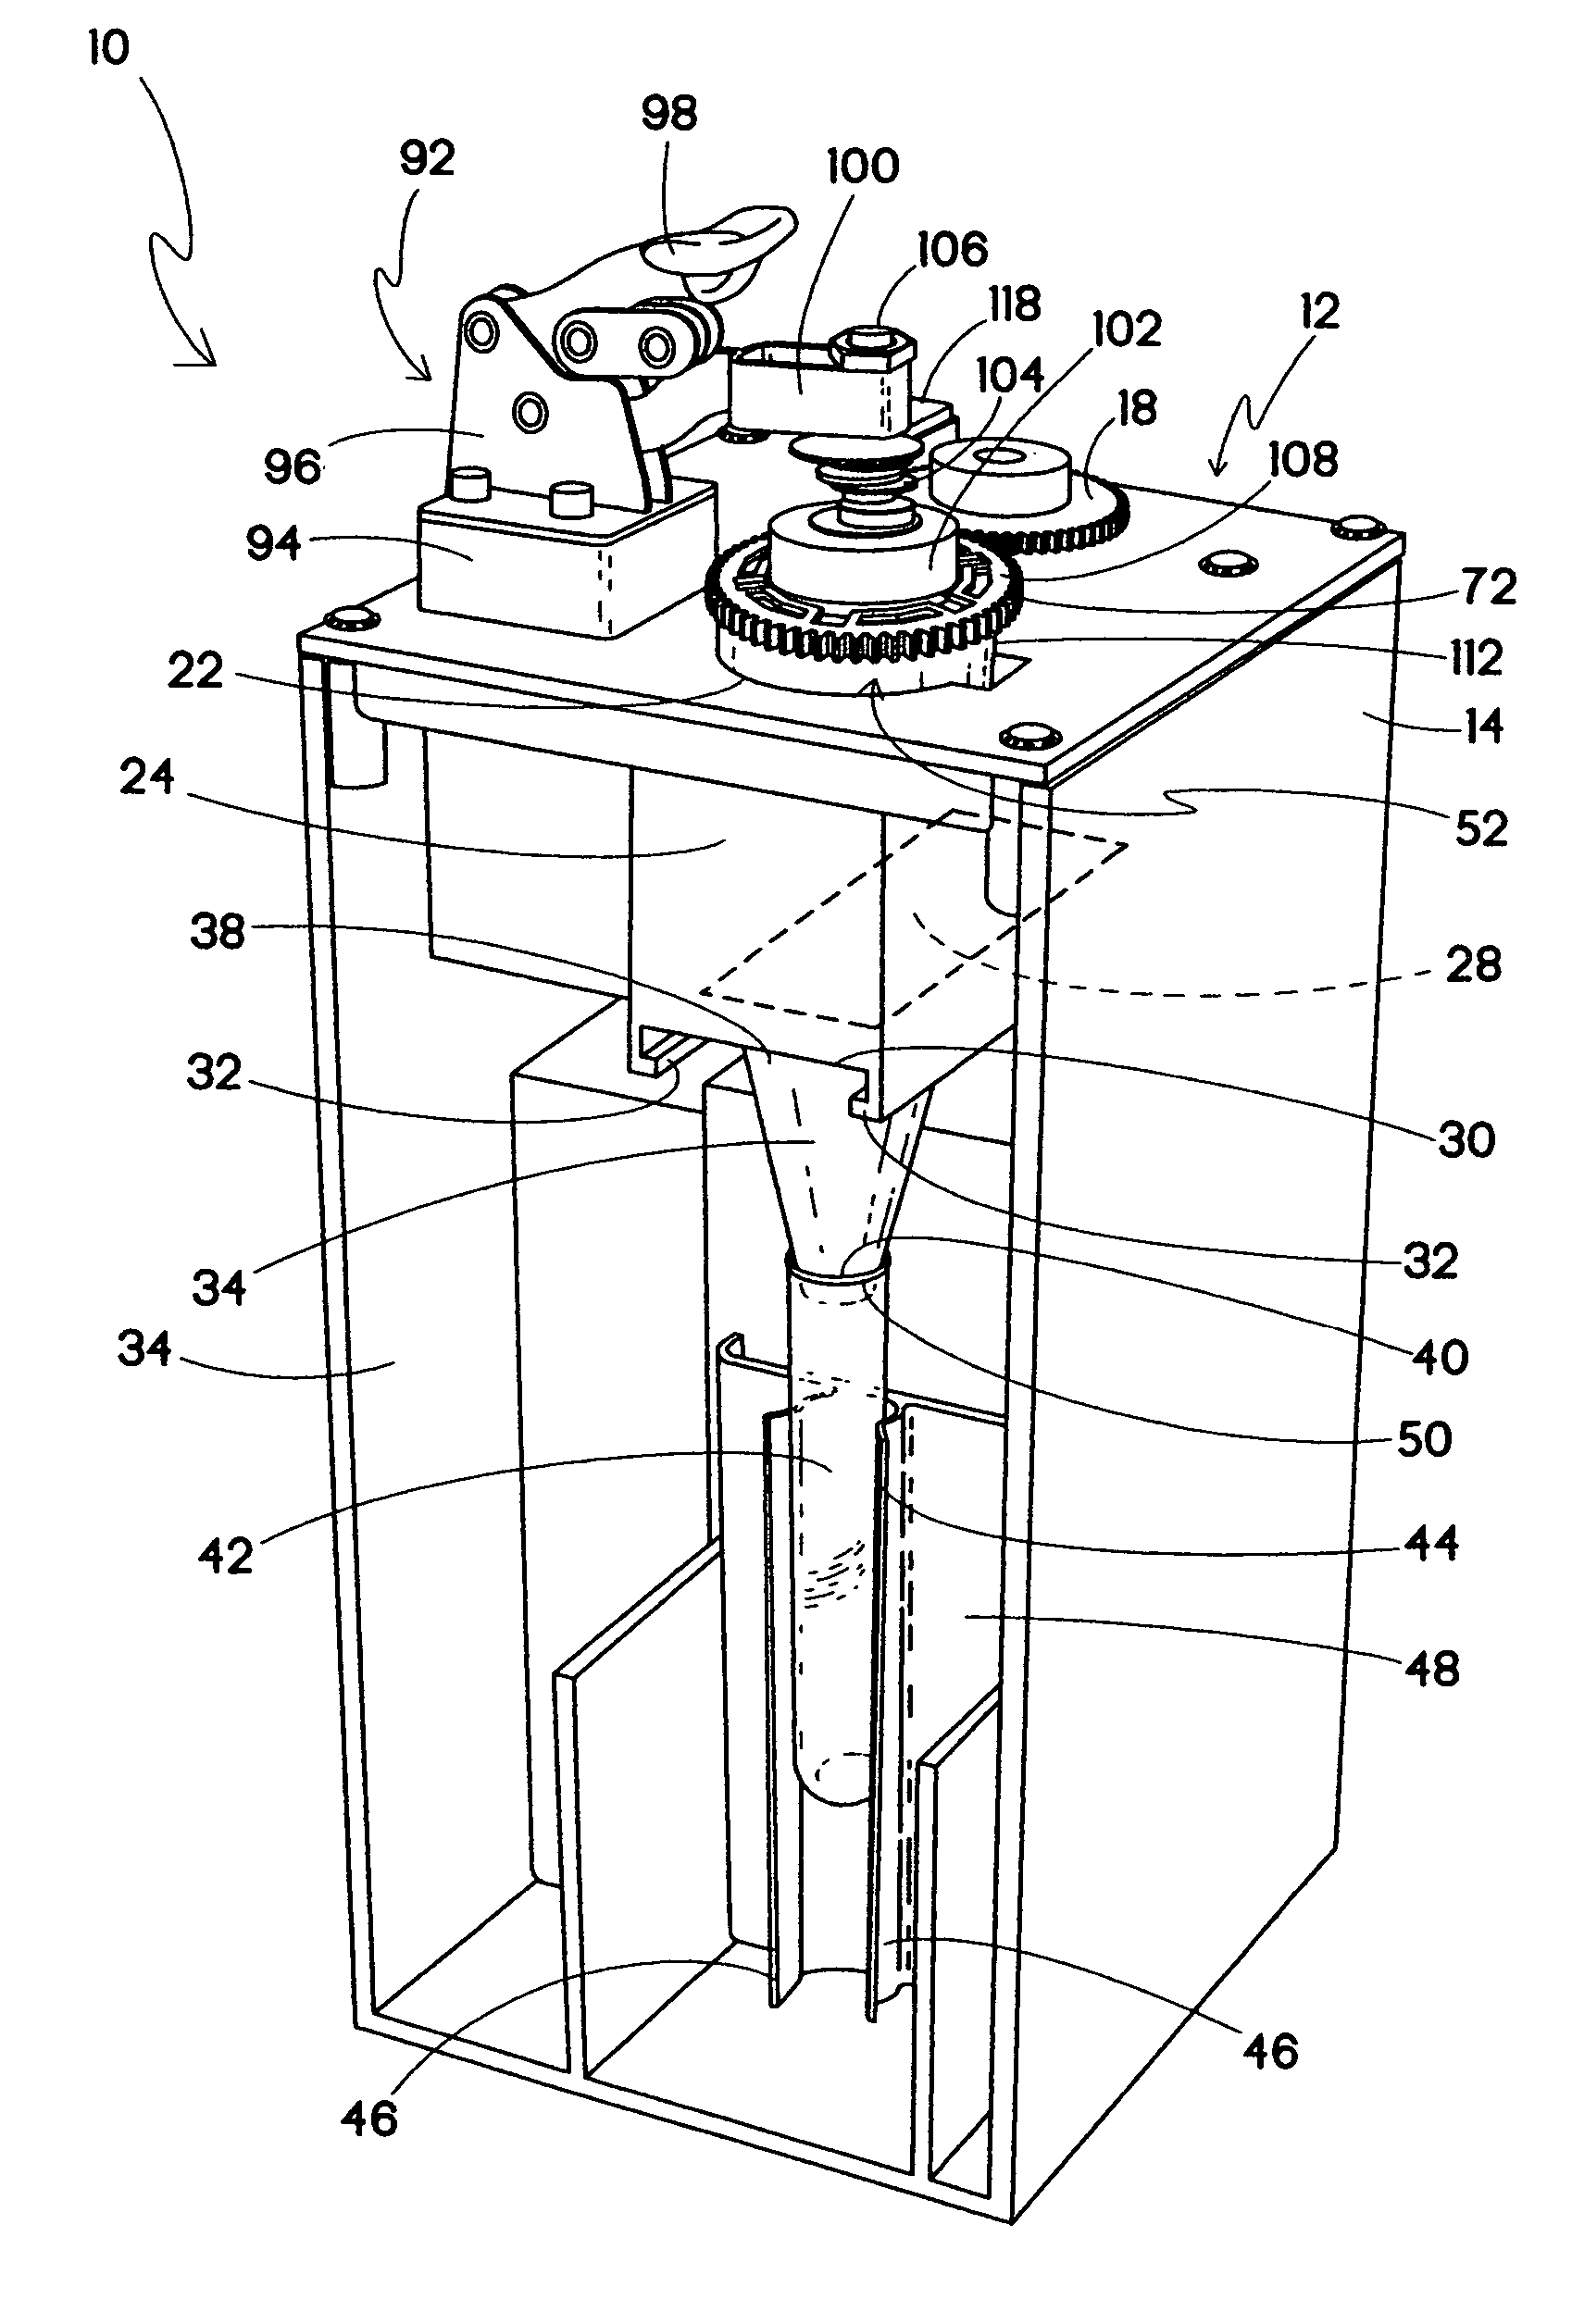 Method and apparatus for comminution of biological specimens